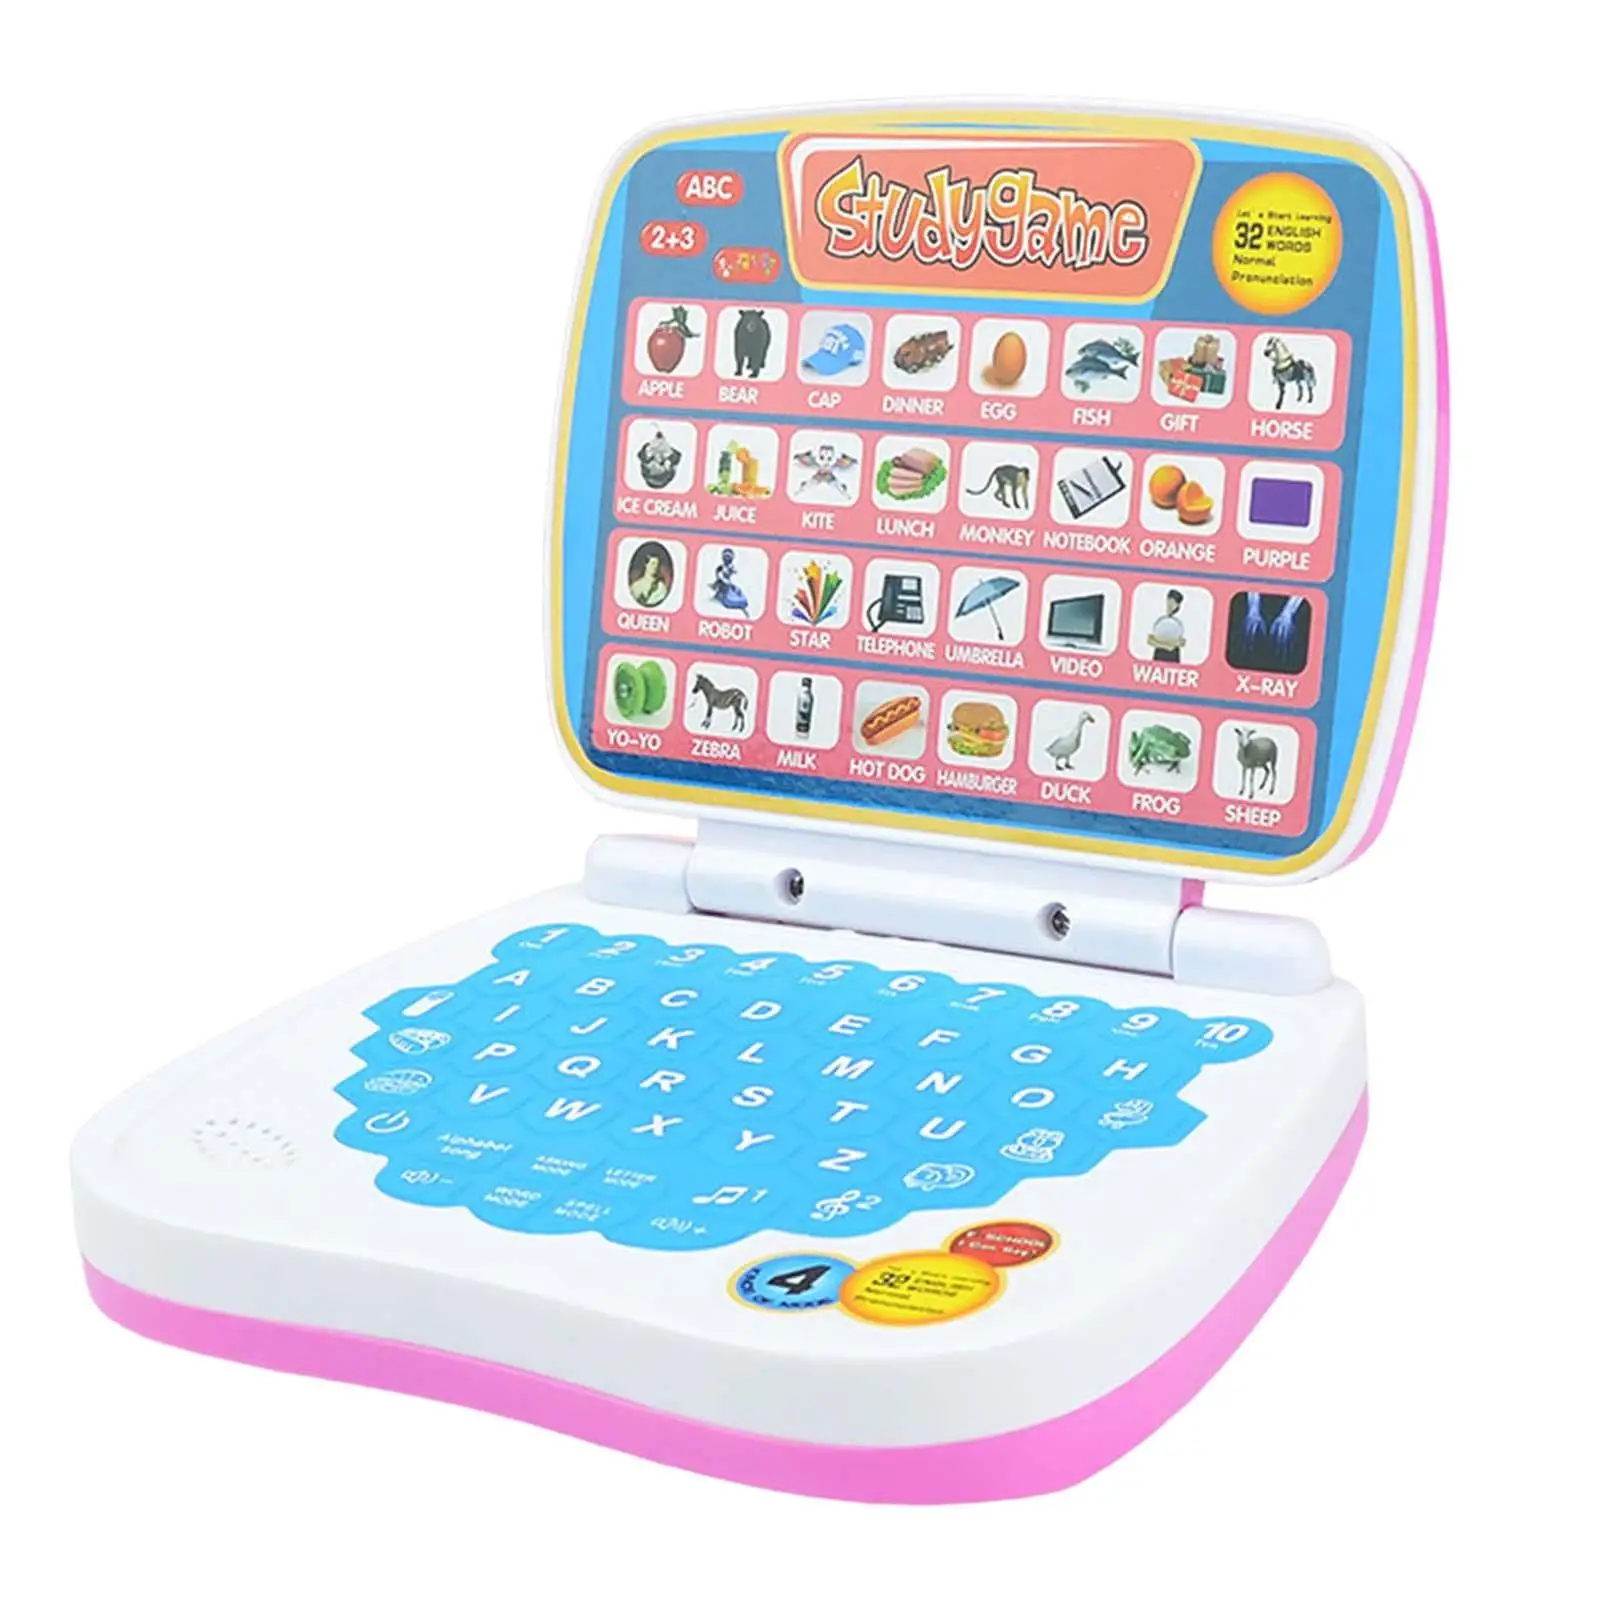 Multifunction Child Interactive Learning Pad Tablet Study Game Computer Kids Laptop Toy for Toddler Girls Boys Kids